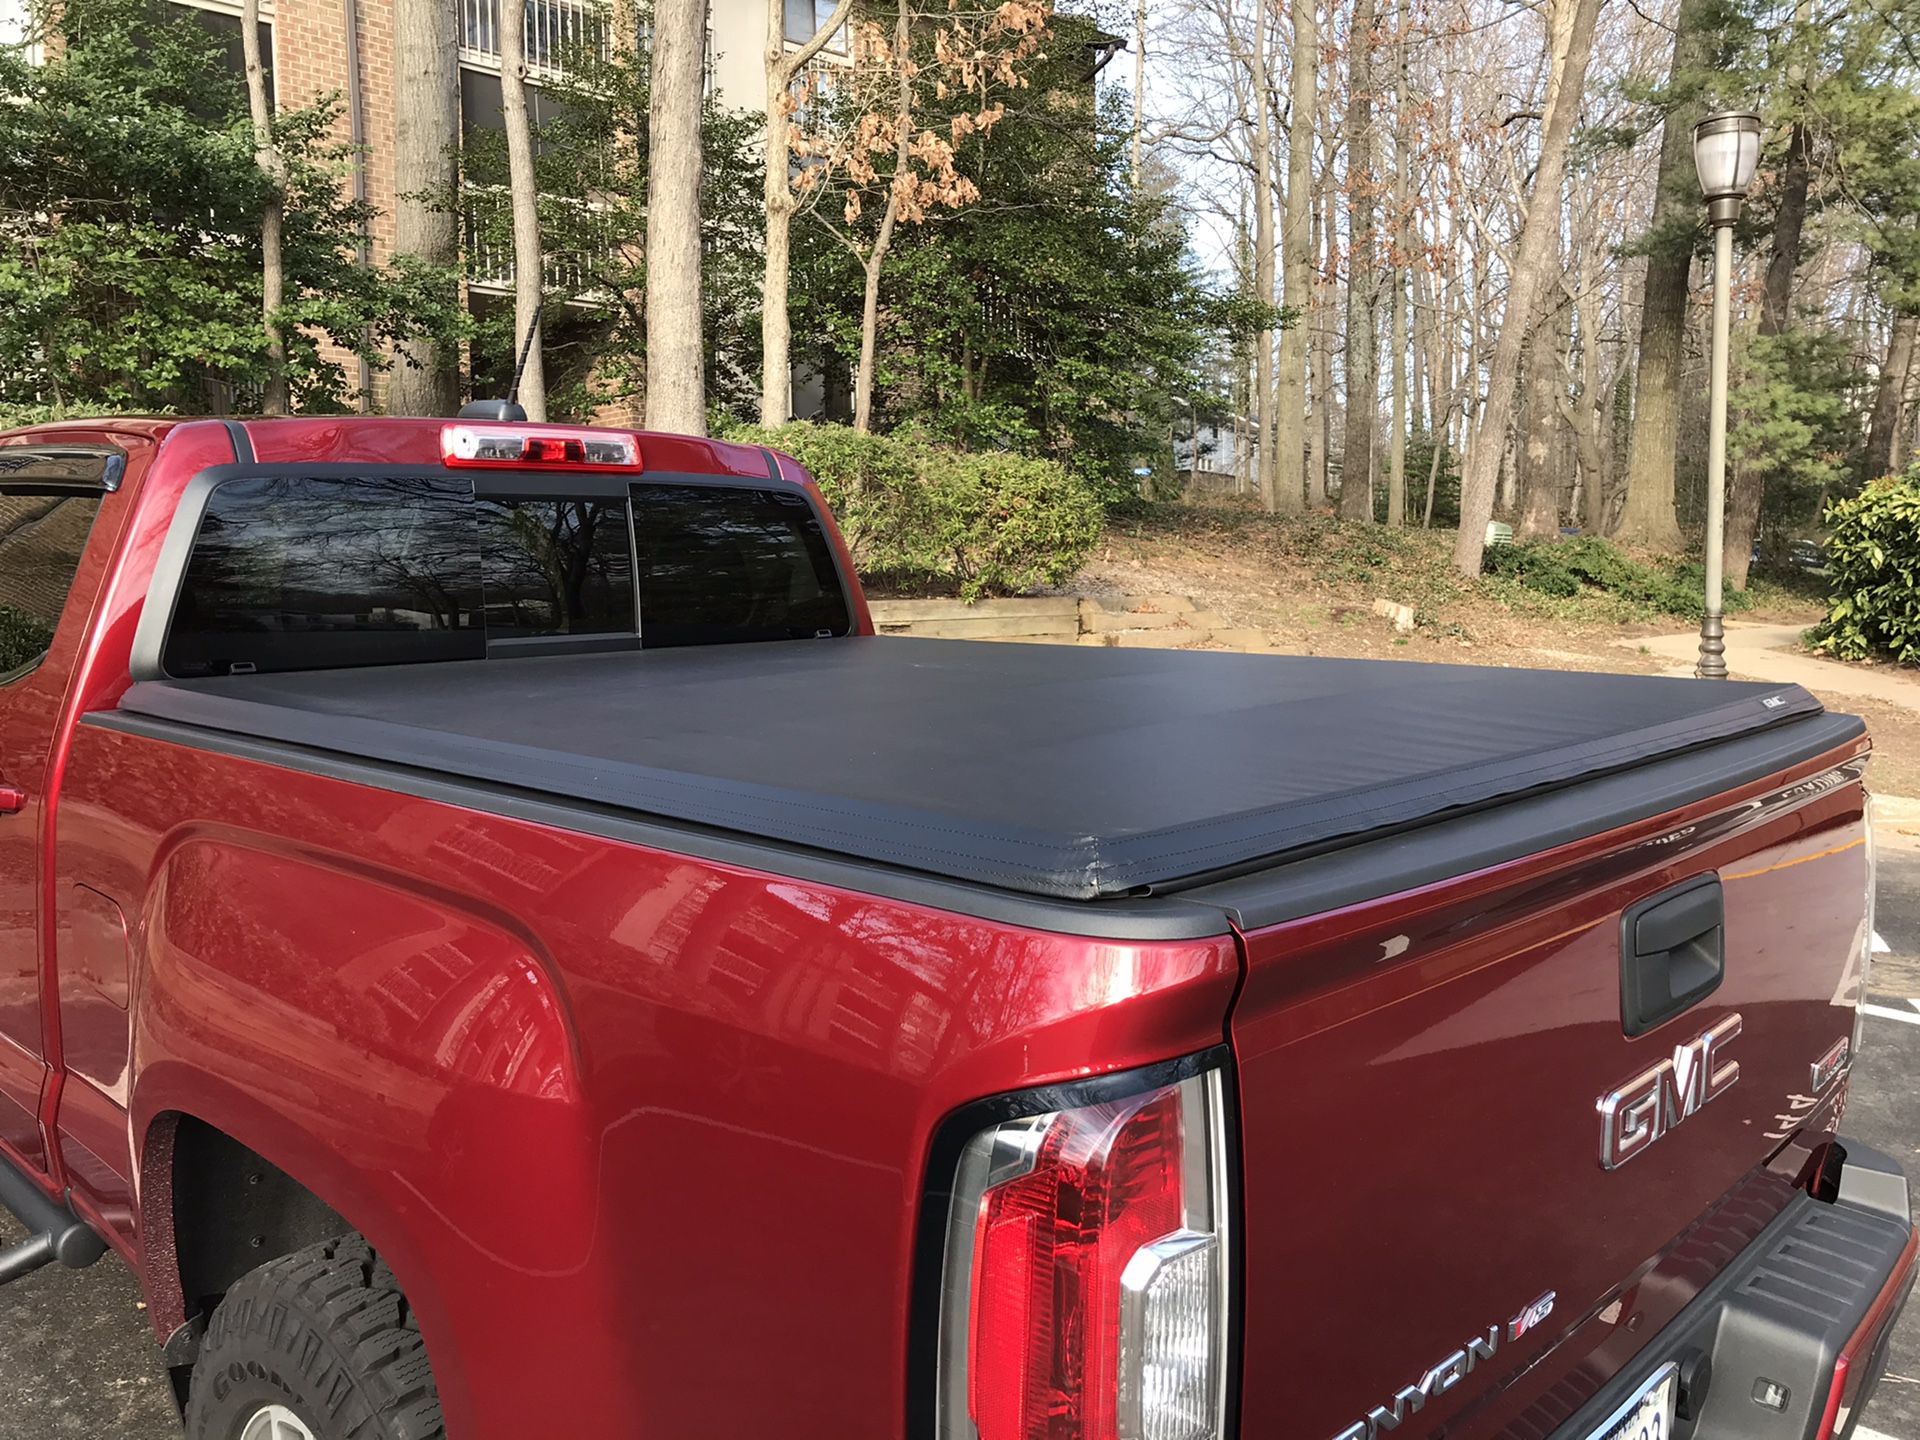 GMC TONNEAU COVER for Sale in Herndon, VA - OfferUp